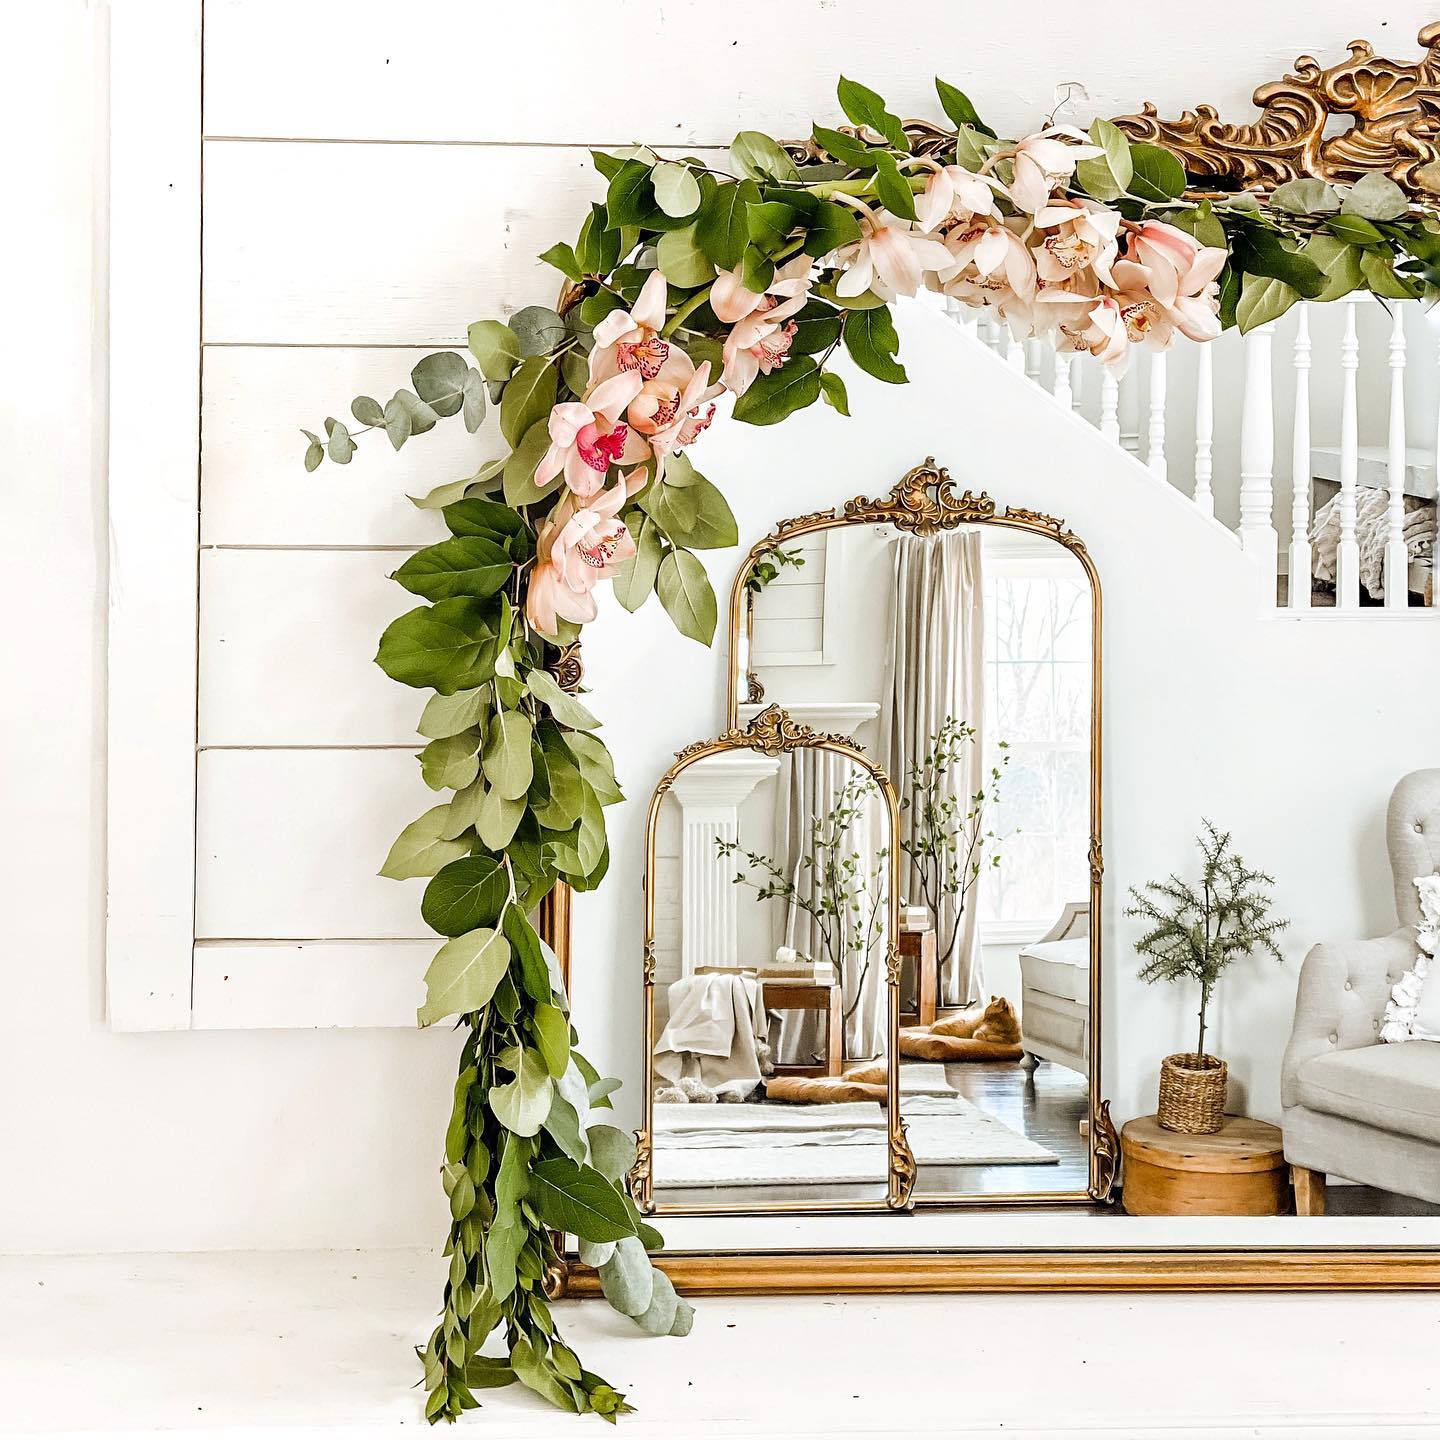 Farmhouse Chic: When Mirrors Bring Rustic Charm to Your Home